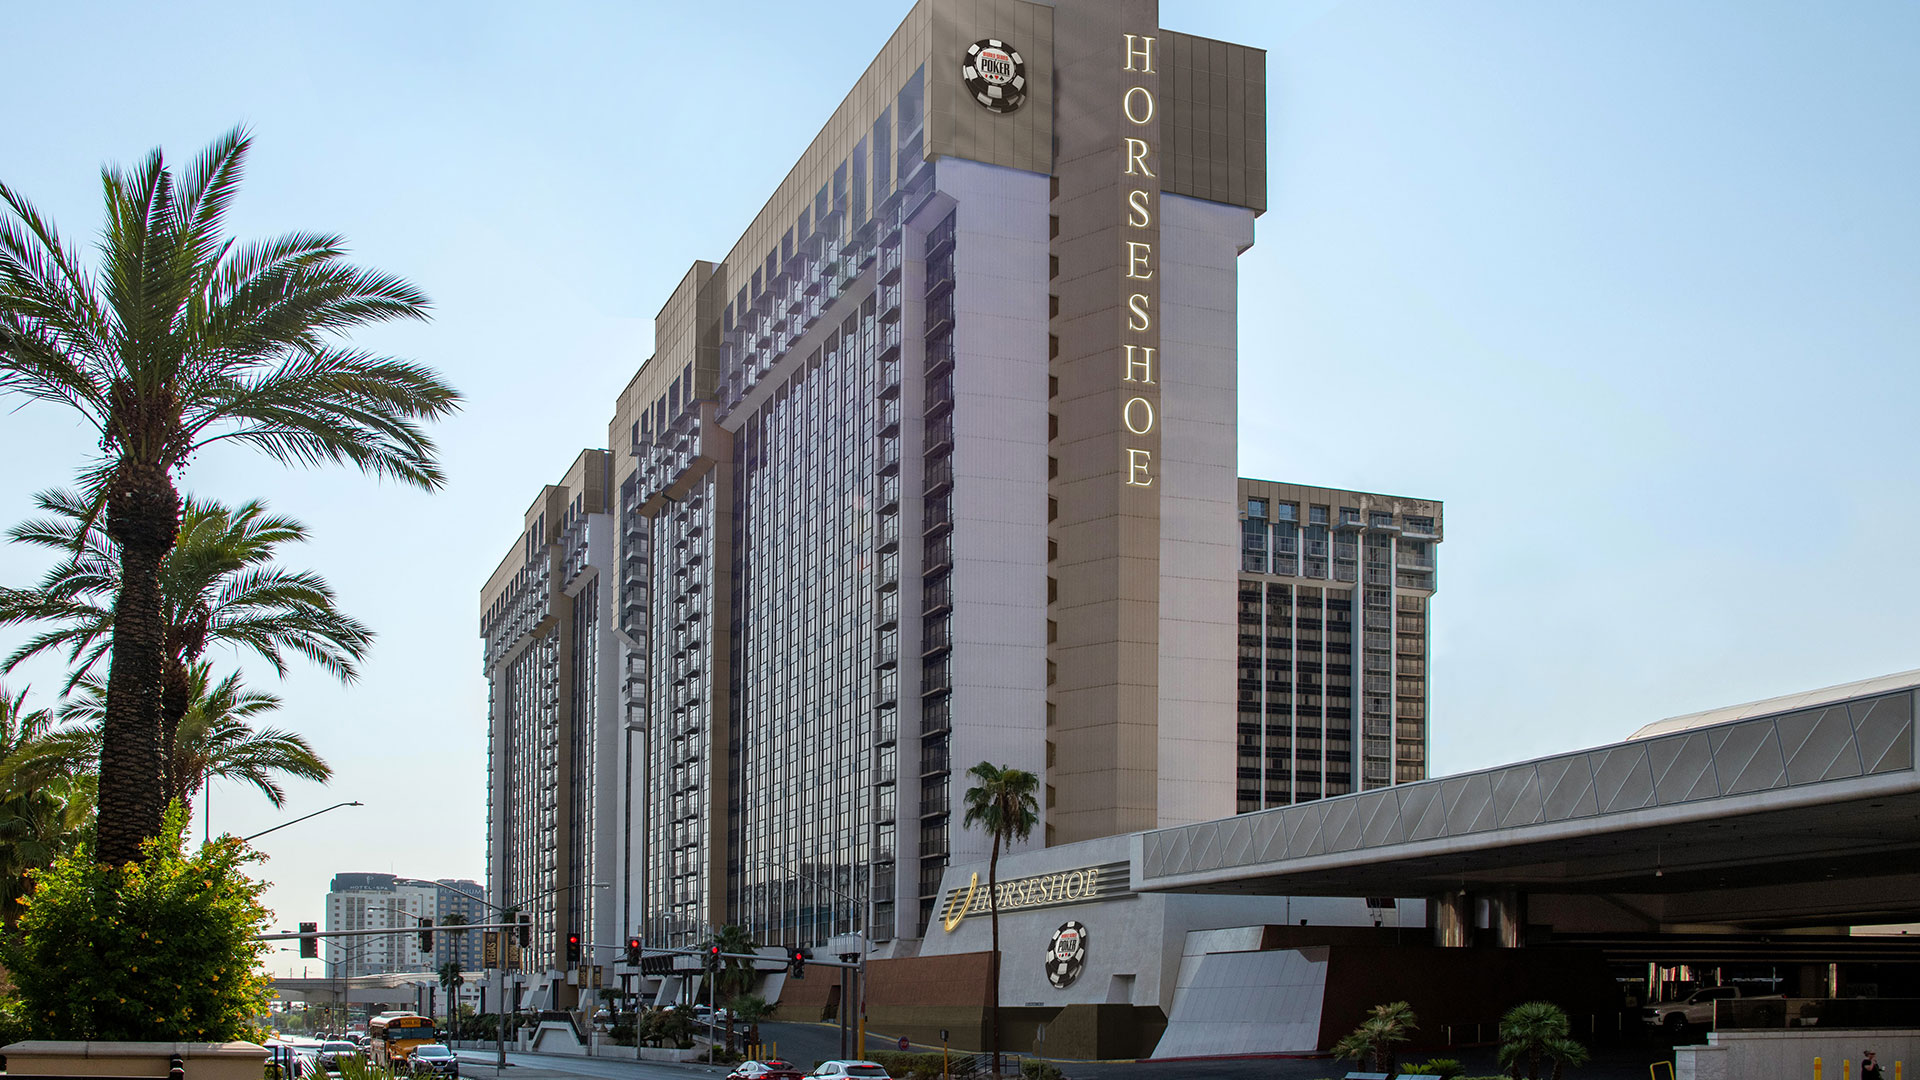 Horseshoe Las Vegas in Las Vegas: Find Hotel Reviews, Rooms, and Prices on